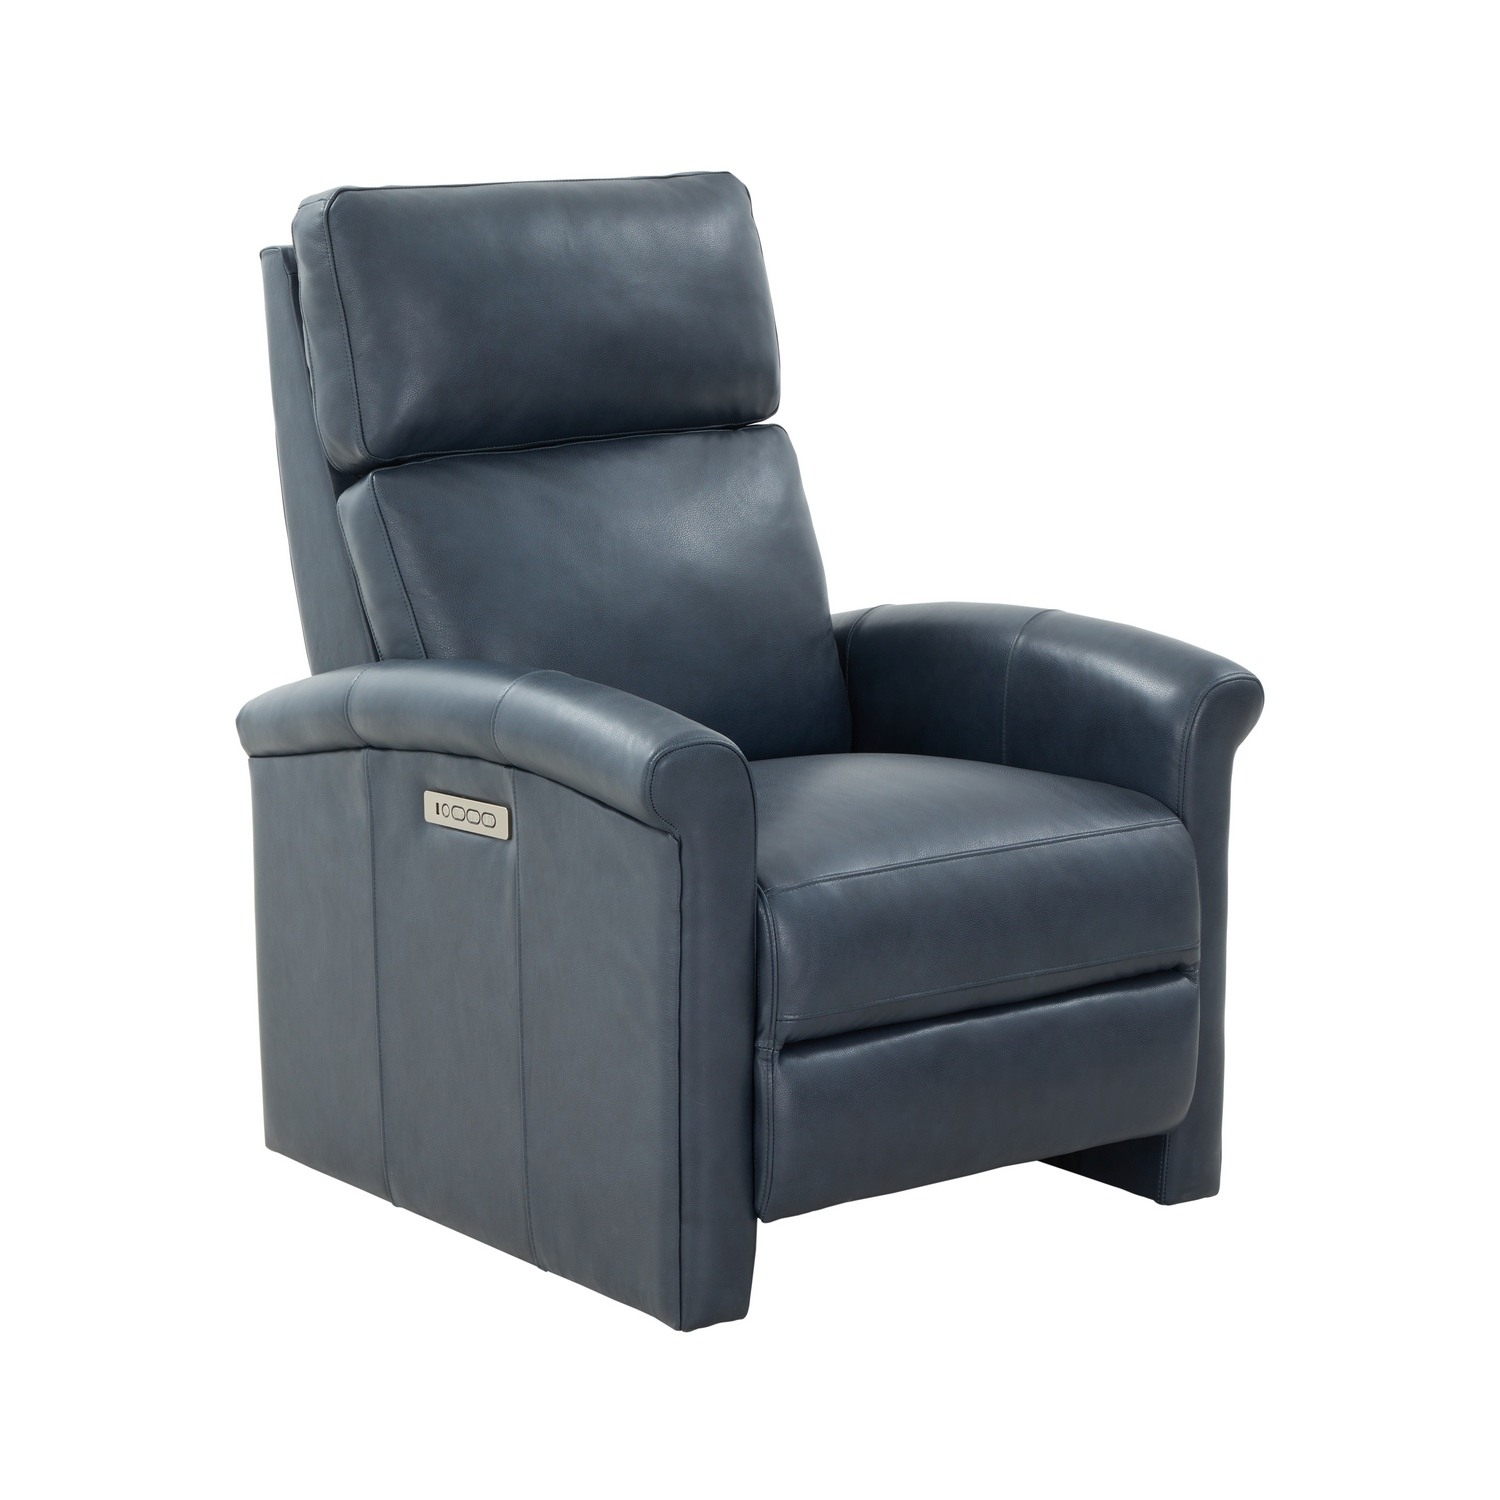 Barcalounger Jaxon Zero Gravity Power Recliner Chair with Power Head Rest and Lumbar - Barone Navy Blue/All Leather